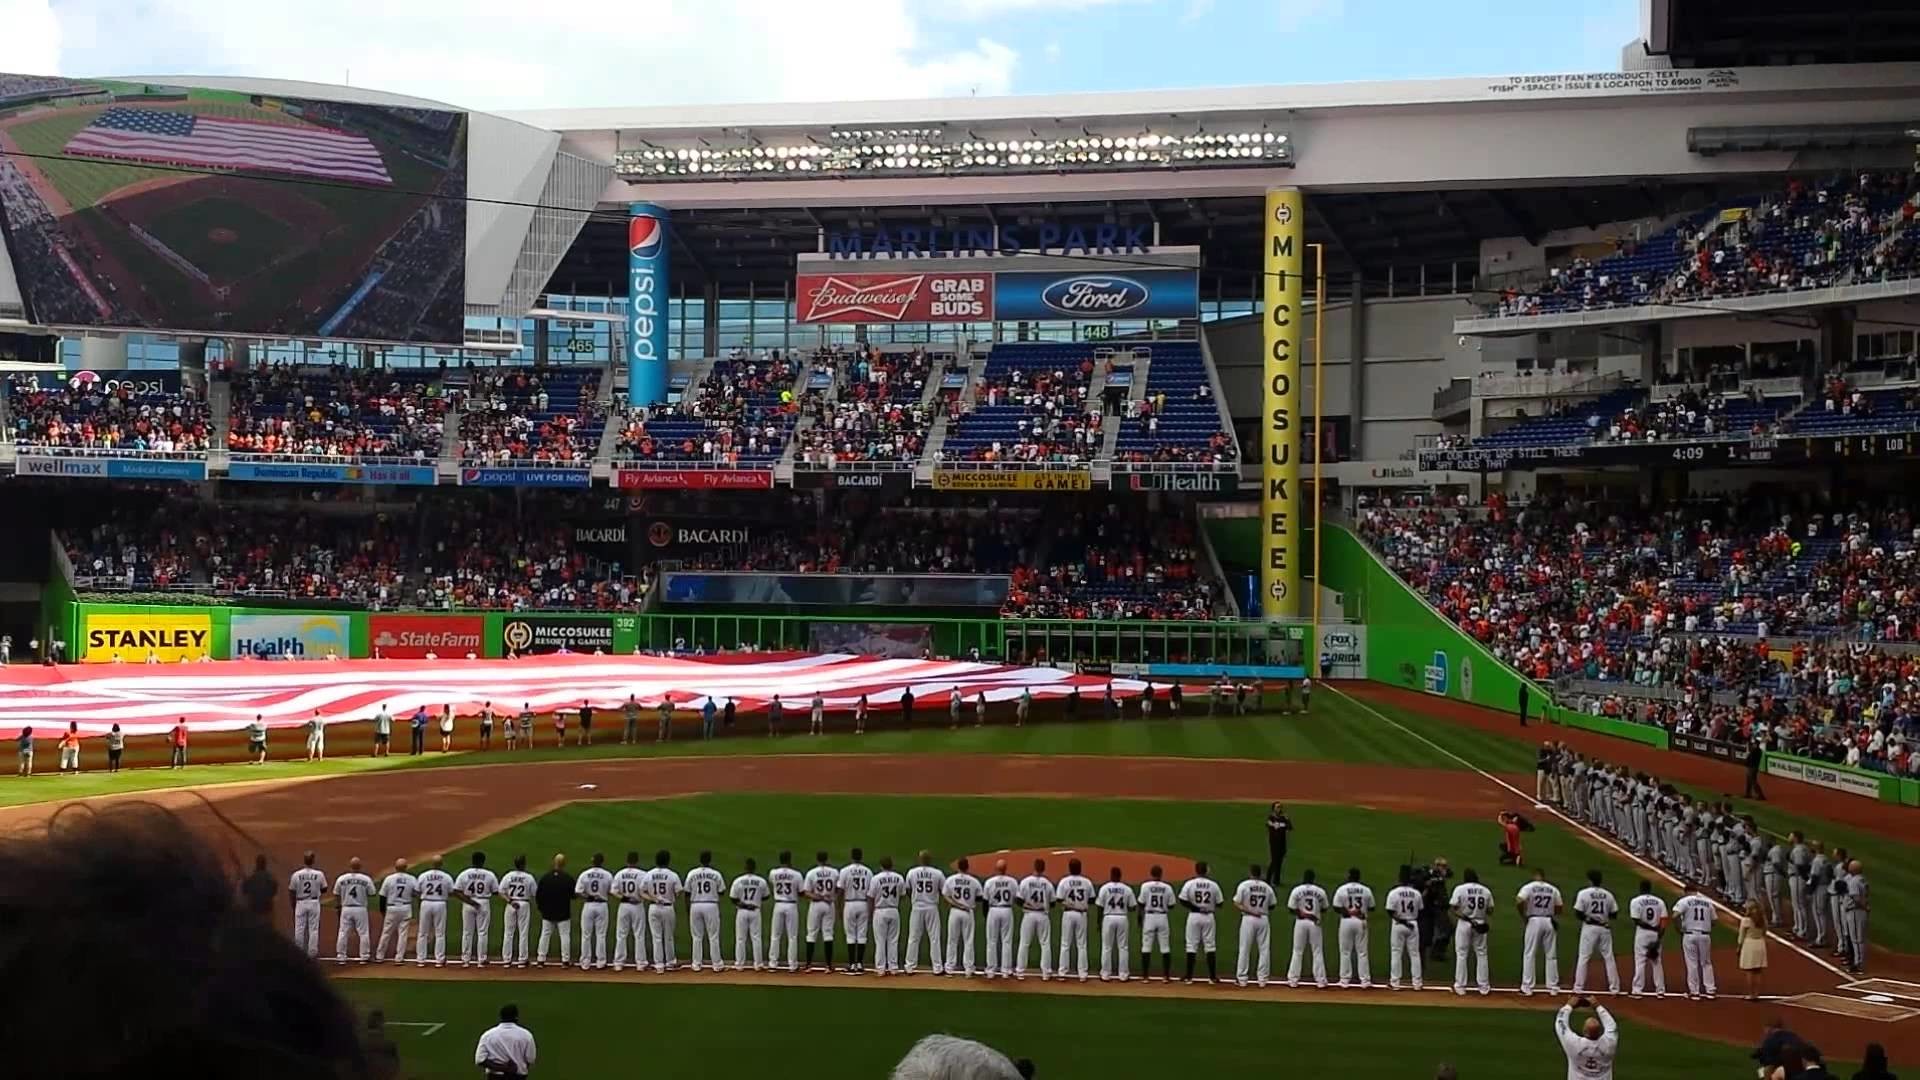 1920x1080 Miami marlins opening day 2015